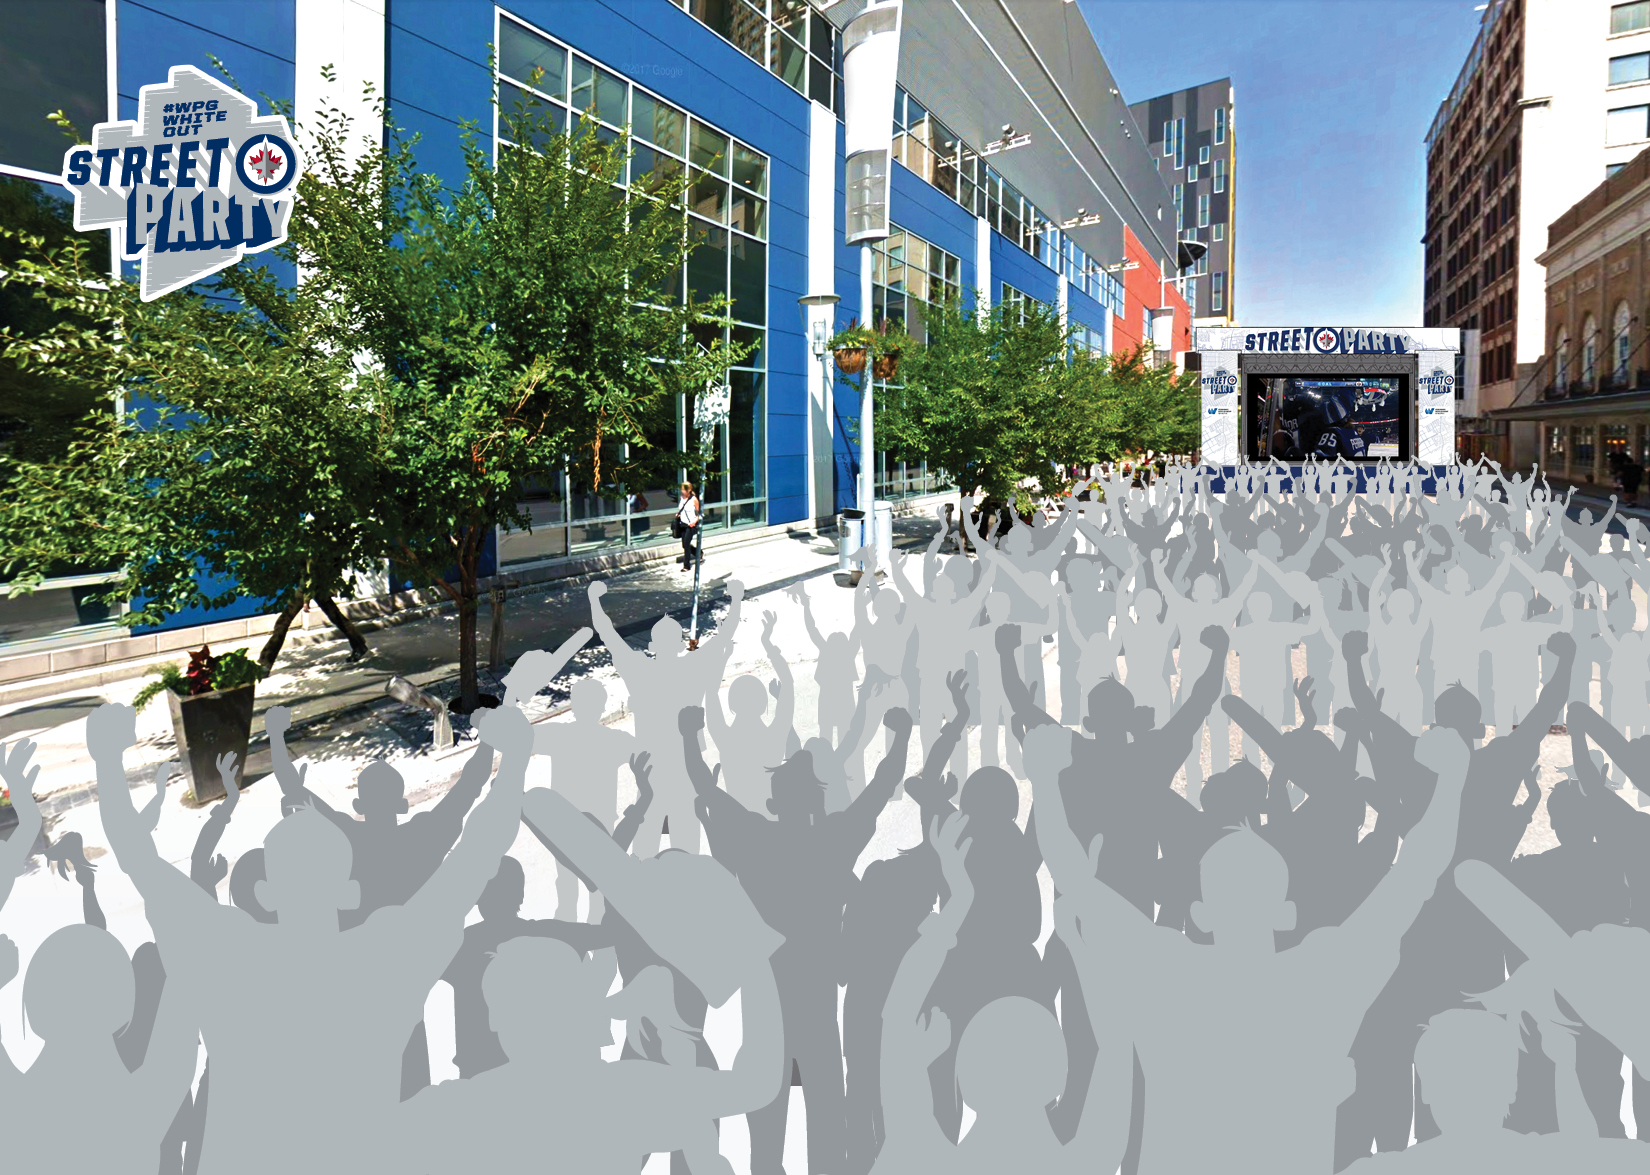 Winnipeg Whiteout Street Party is going to be the biggest one to date